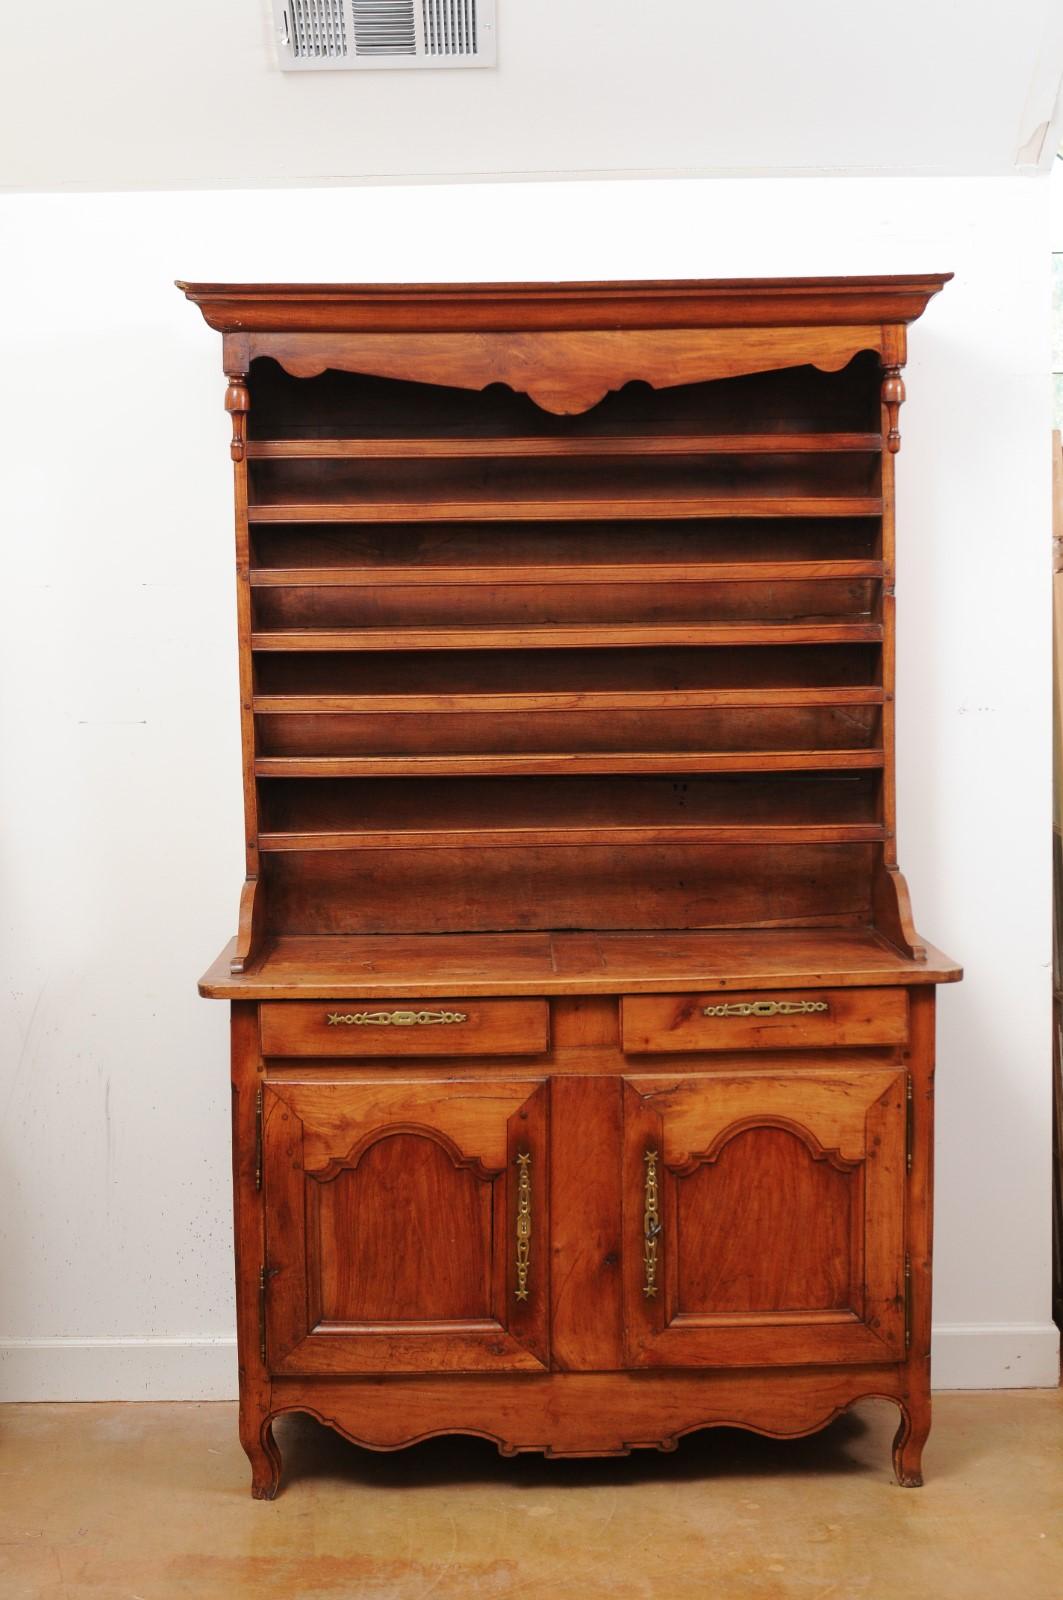 A French cherry vaisselier from the 19th century from the Charente region, with turned finials, plate shelves, drawers and doors. Created in Western France during the 19th century, this cherry charentaise vaisselier features a narrow upper section